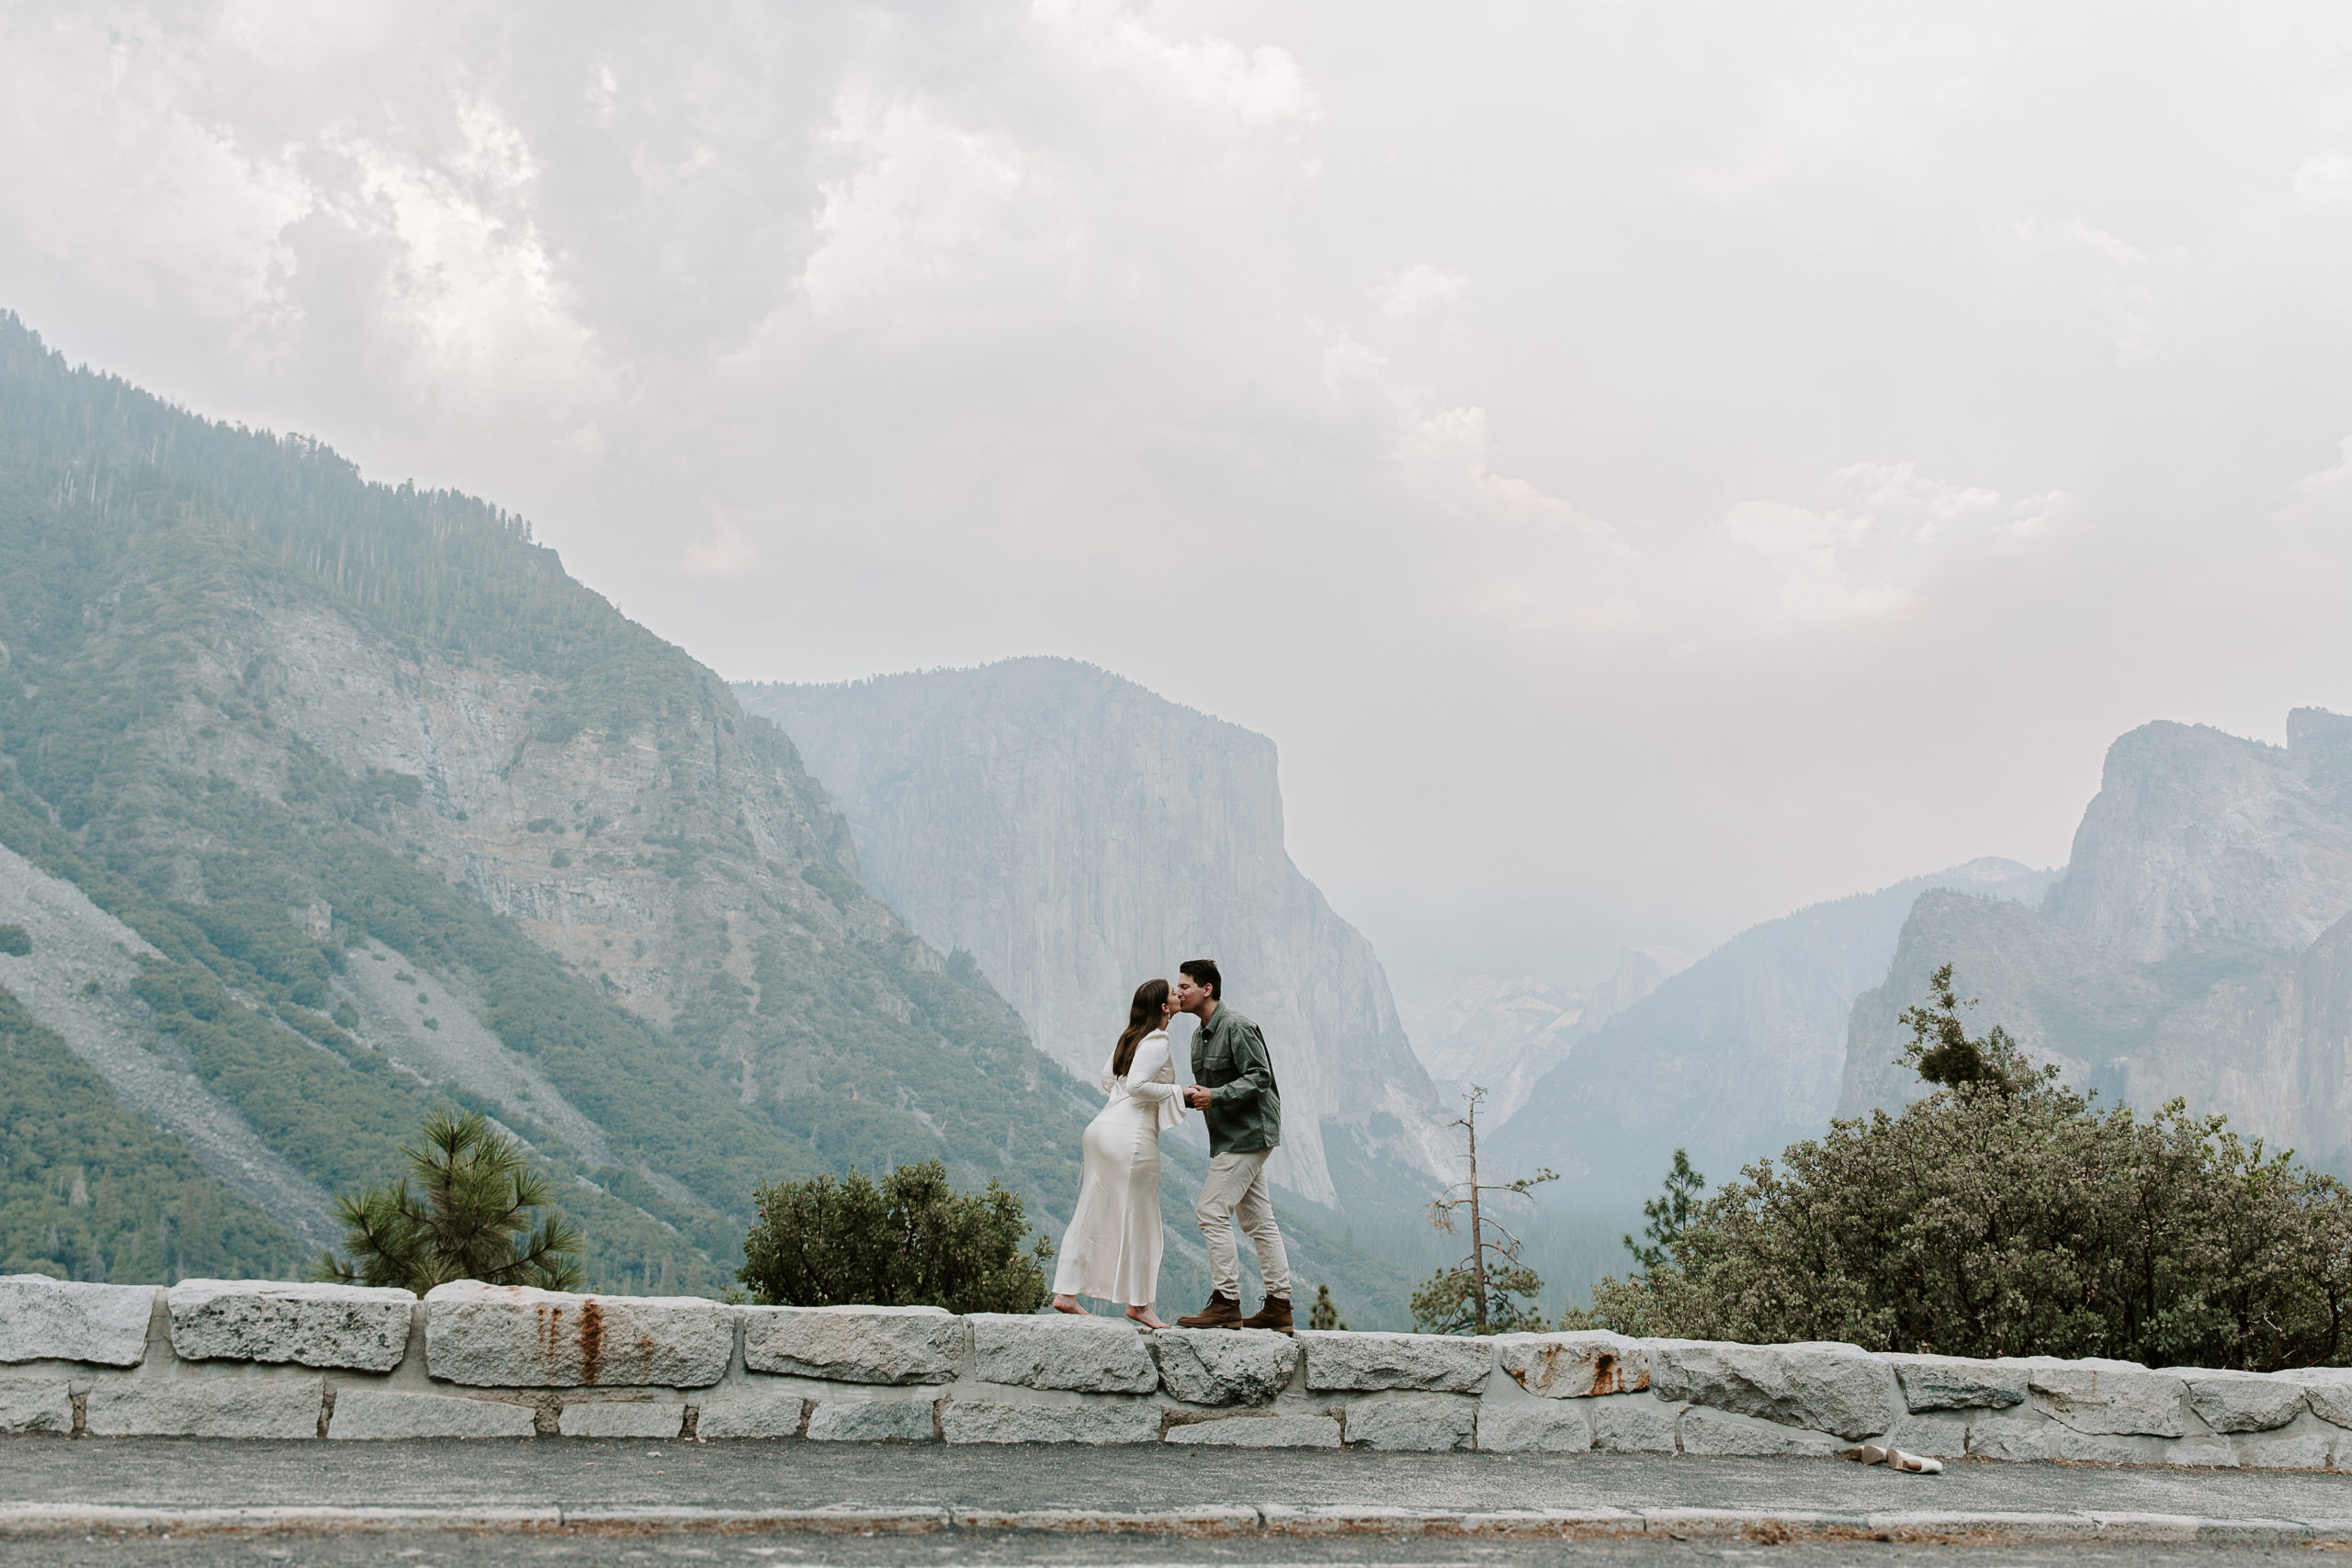 Couple standing on a wall sharing a kiss with Yosemite Valley in the background during their couple photos at the Tunnel View of Yosemite